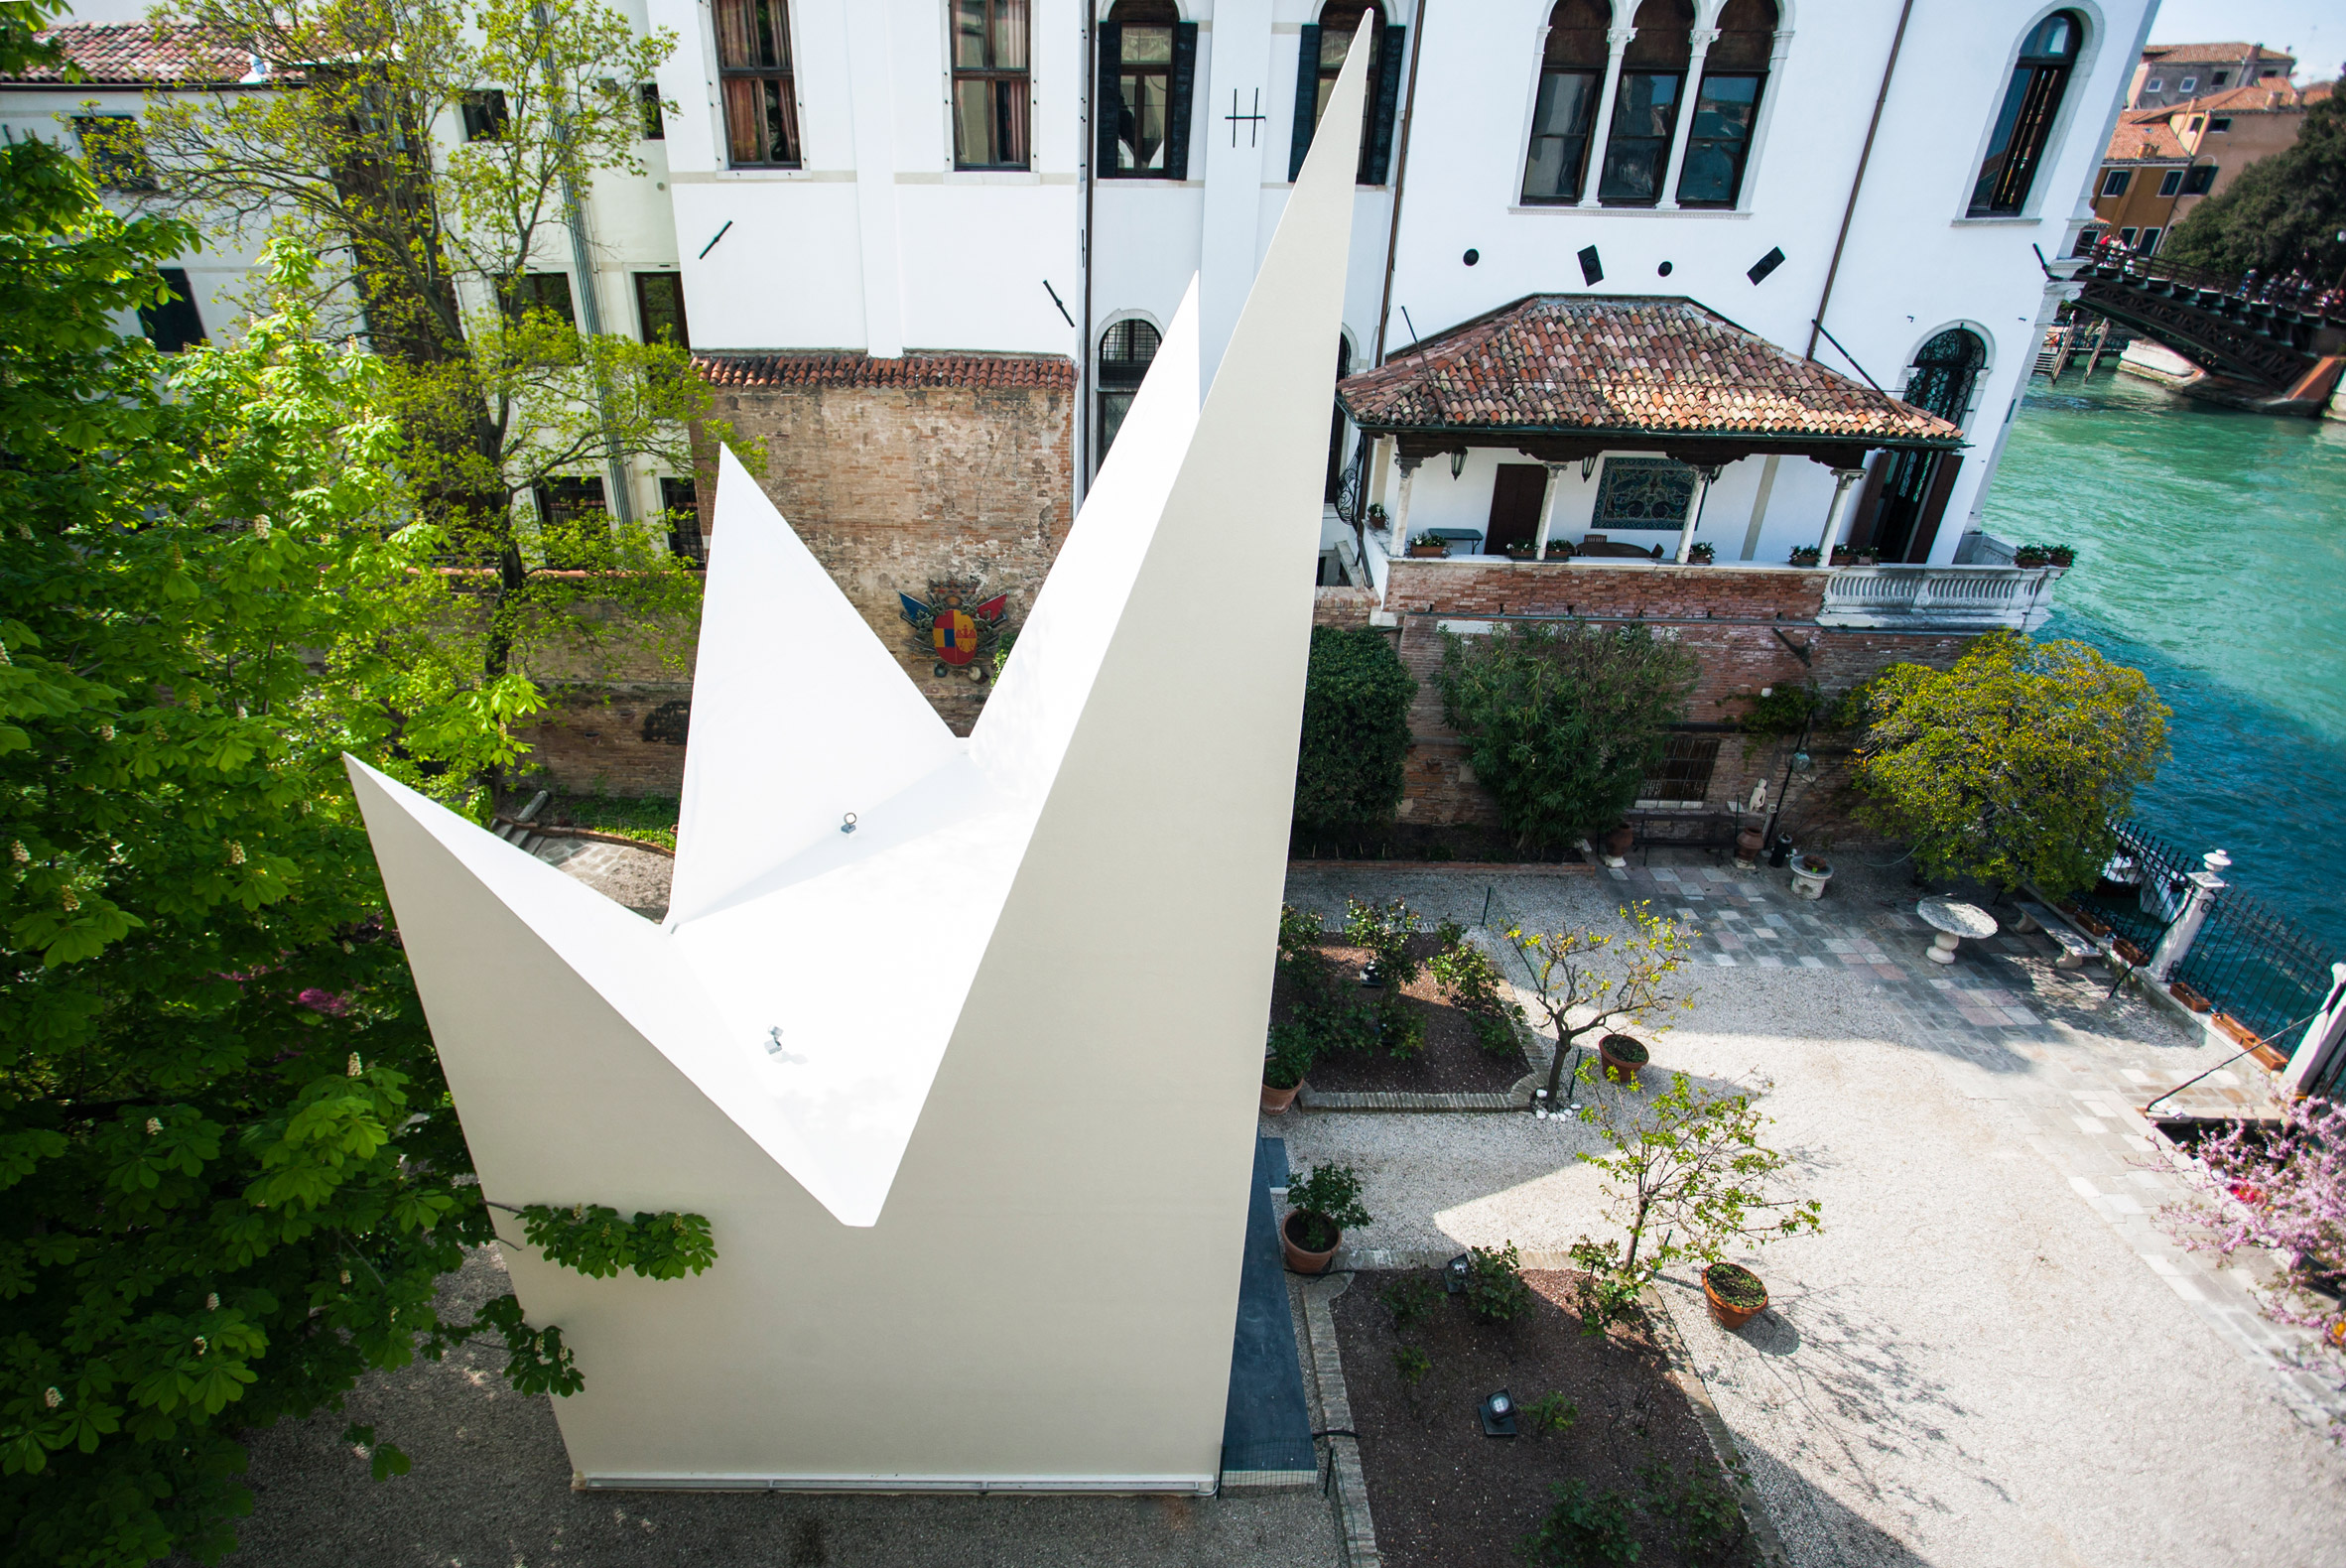 Roof view of Hanji House pavilion by Stefano Boeri Architetti